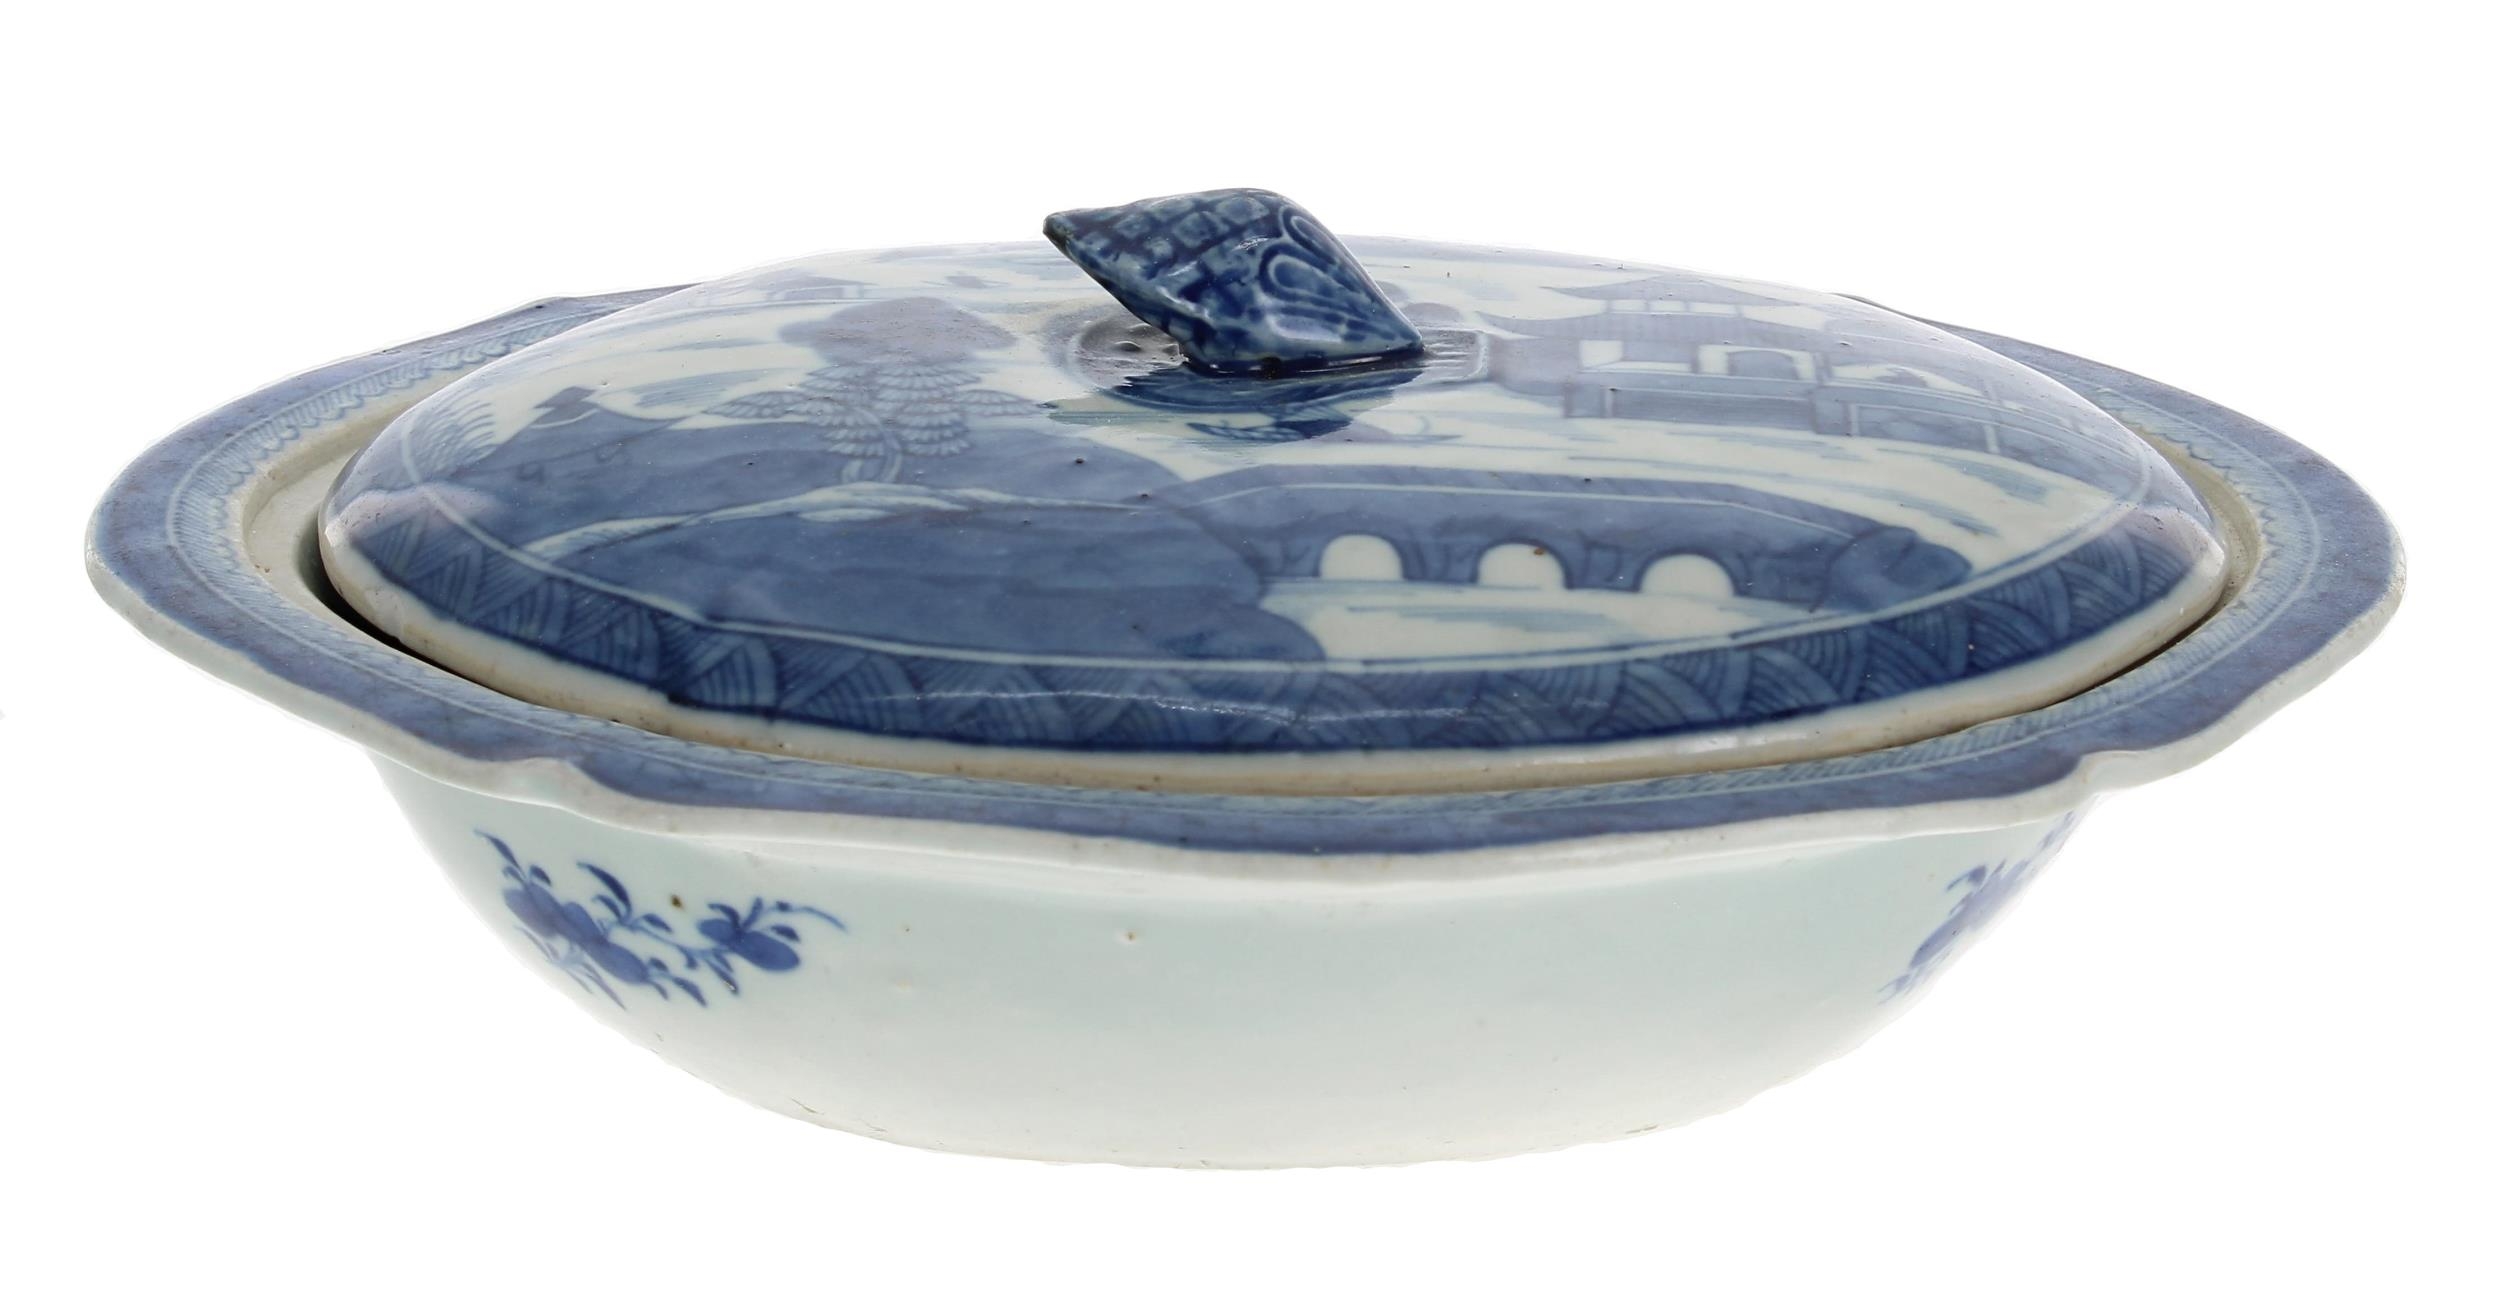 Chinese export blue and white porcelain oval tureen and cover, decorated with pagoda landscapes, 11" - Image 4 of 7